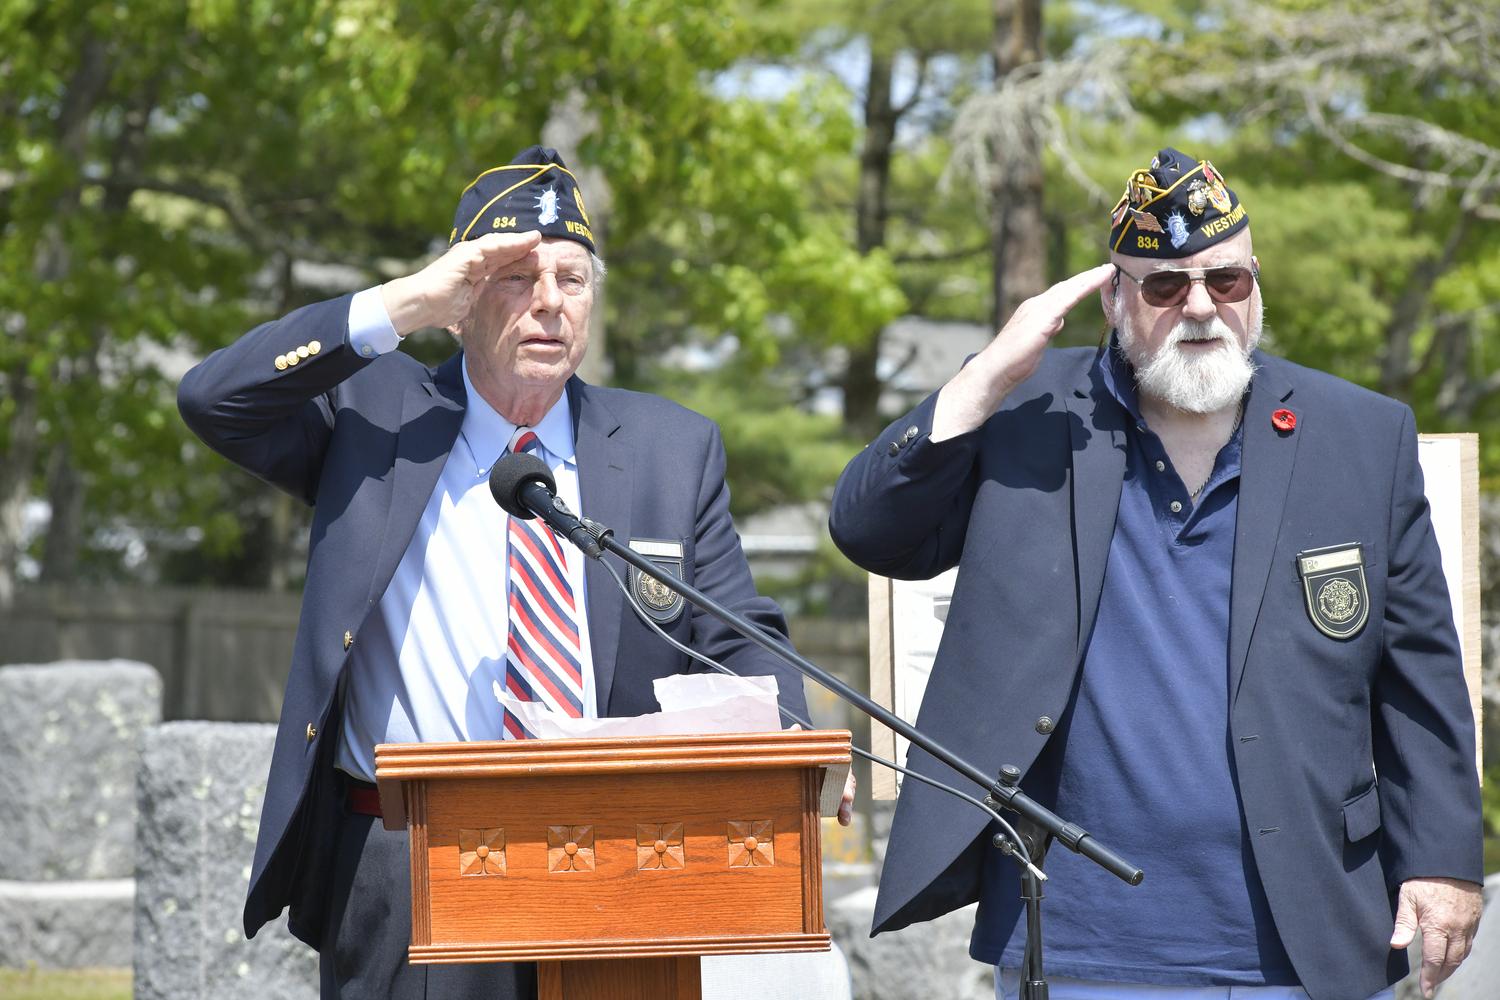 Thomas Hadlock and Paul Haines during Memorial Day services at Westhampton Cemetery on Monday.